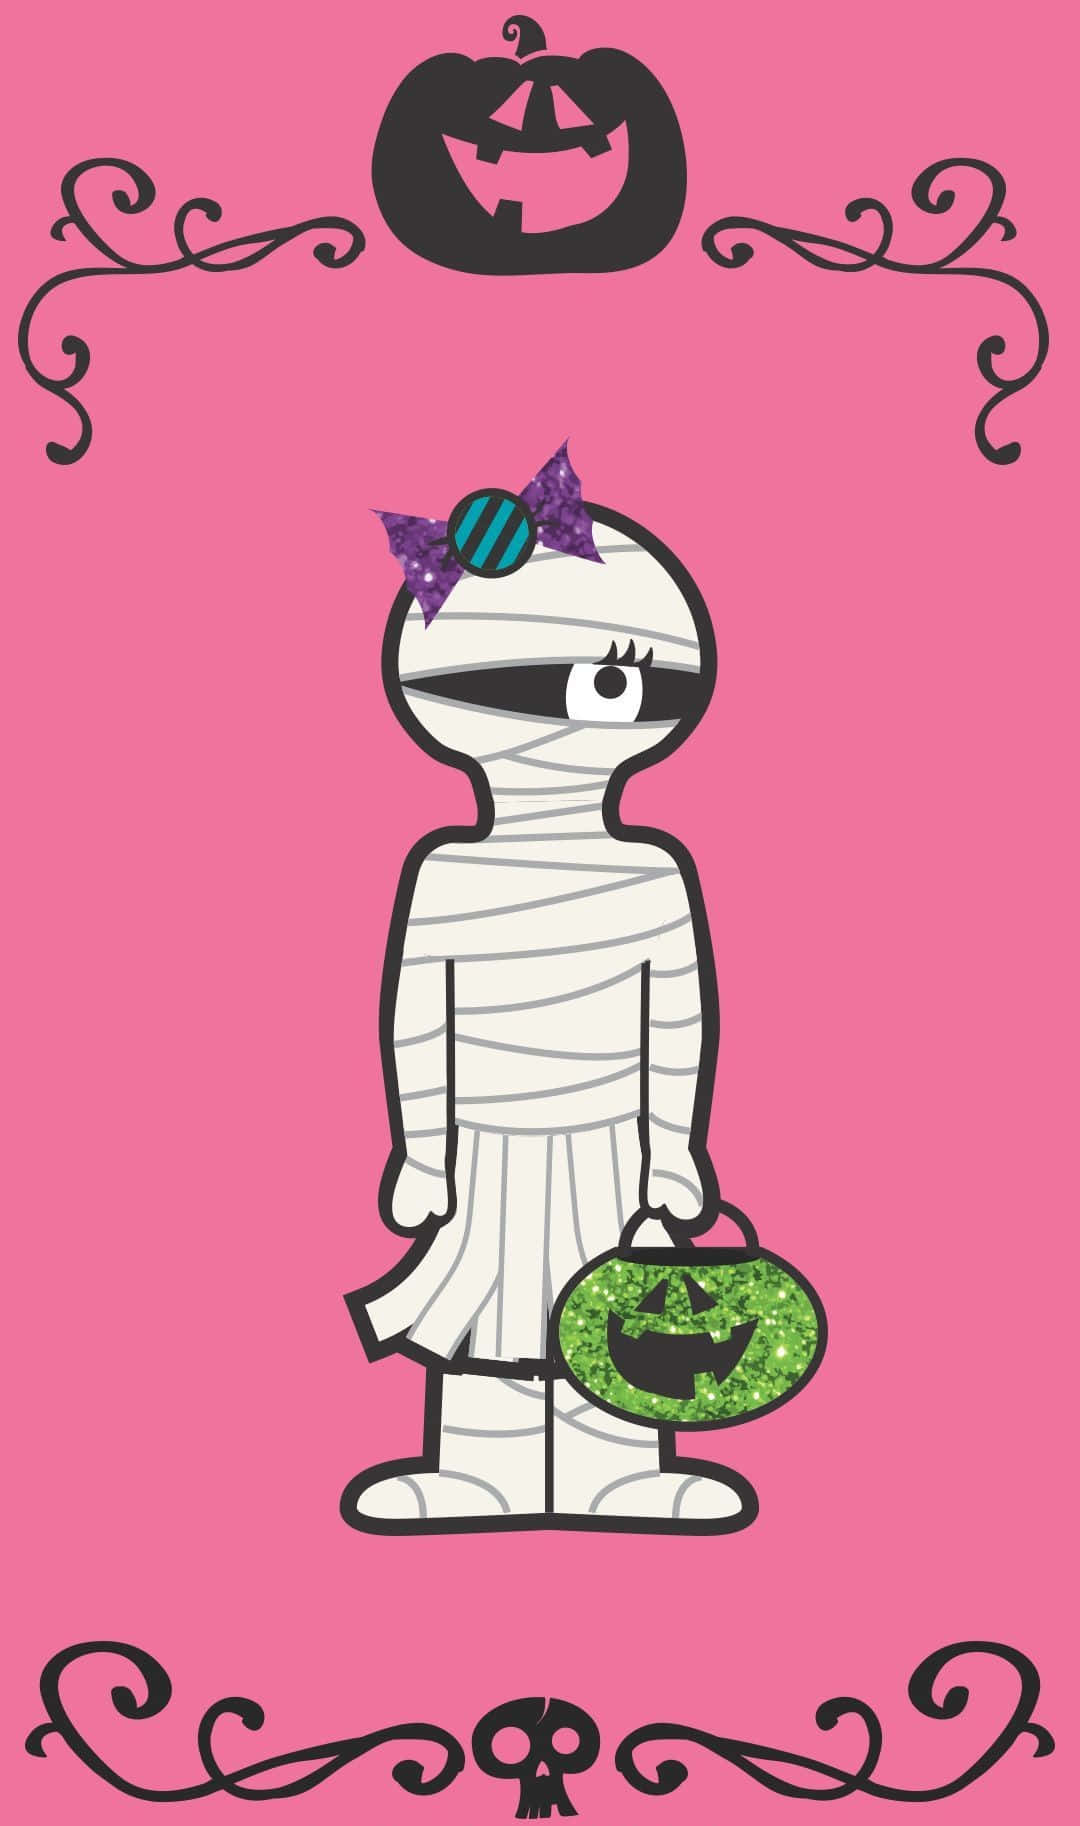 Dress up to Spook your Neighbors with a Mummy Costume Wallpaper